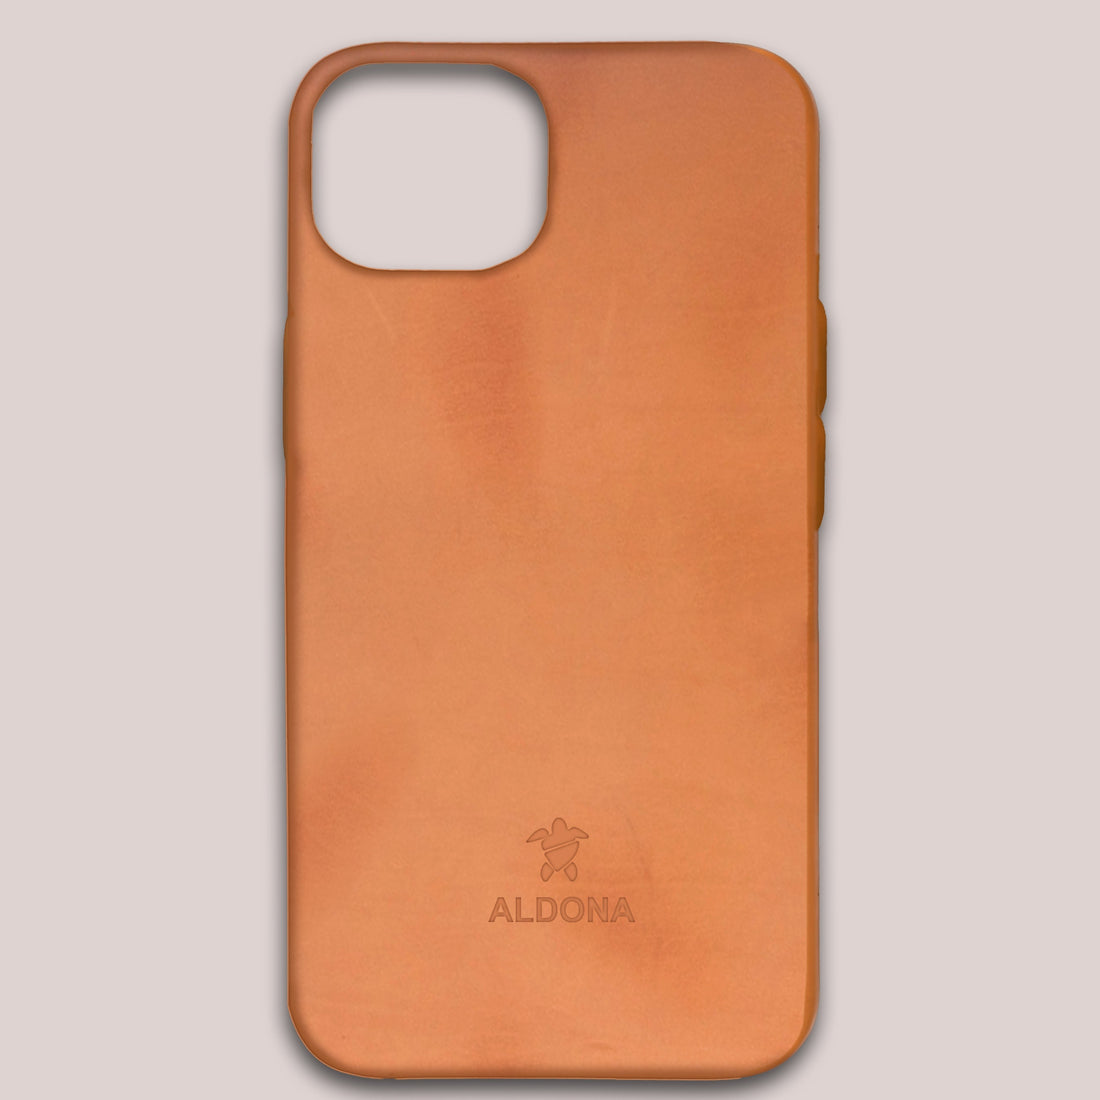 Kalon Case for iPhone 14 series with MagSafe Compatibility - Cognac